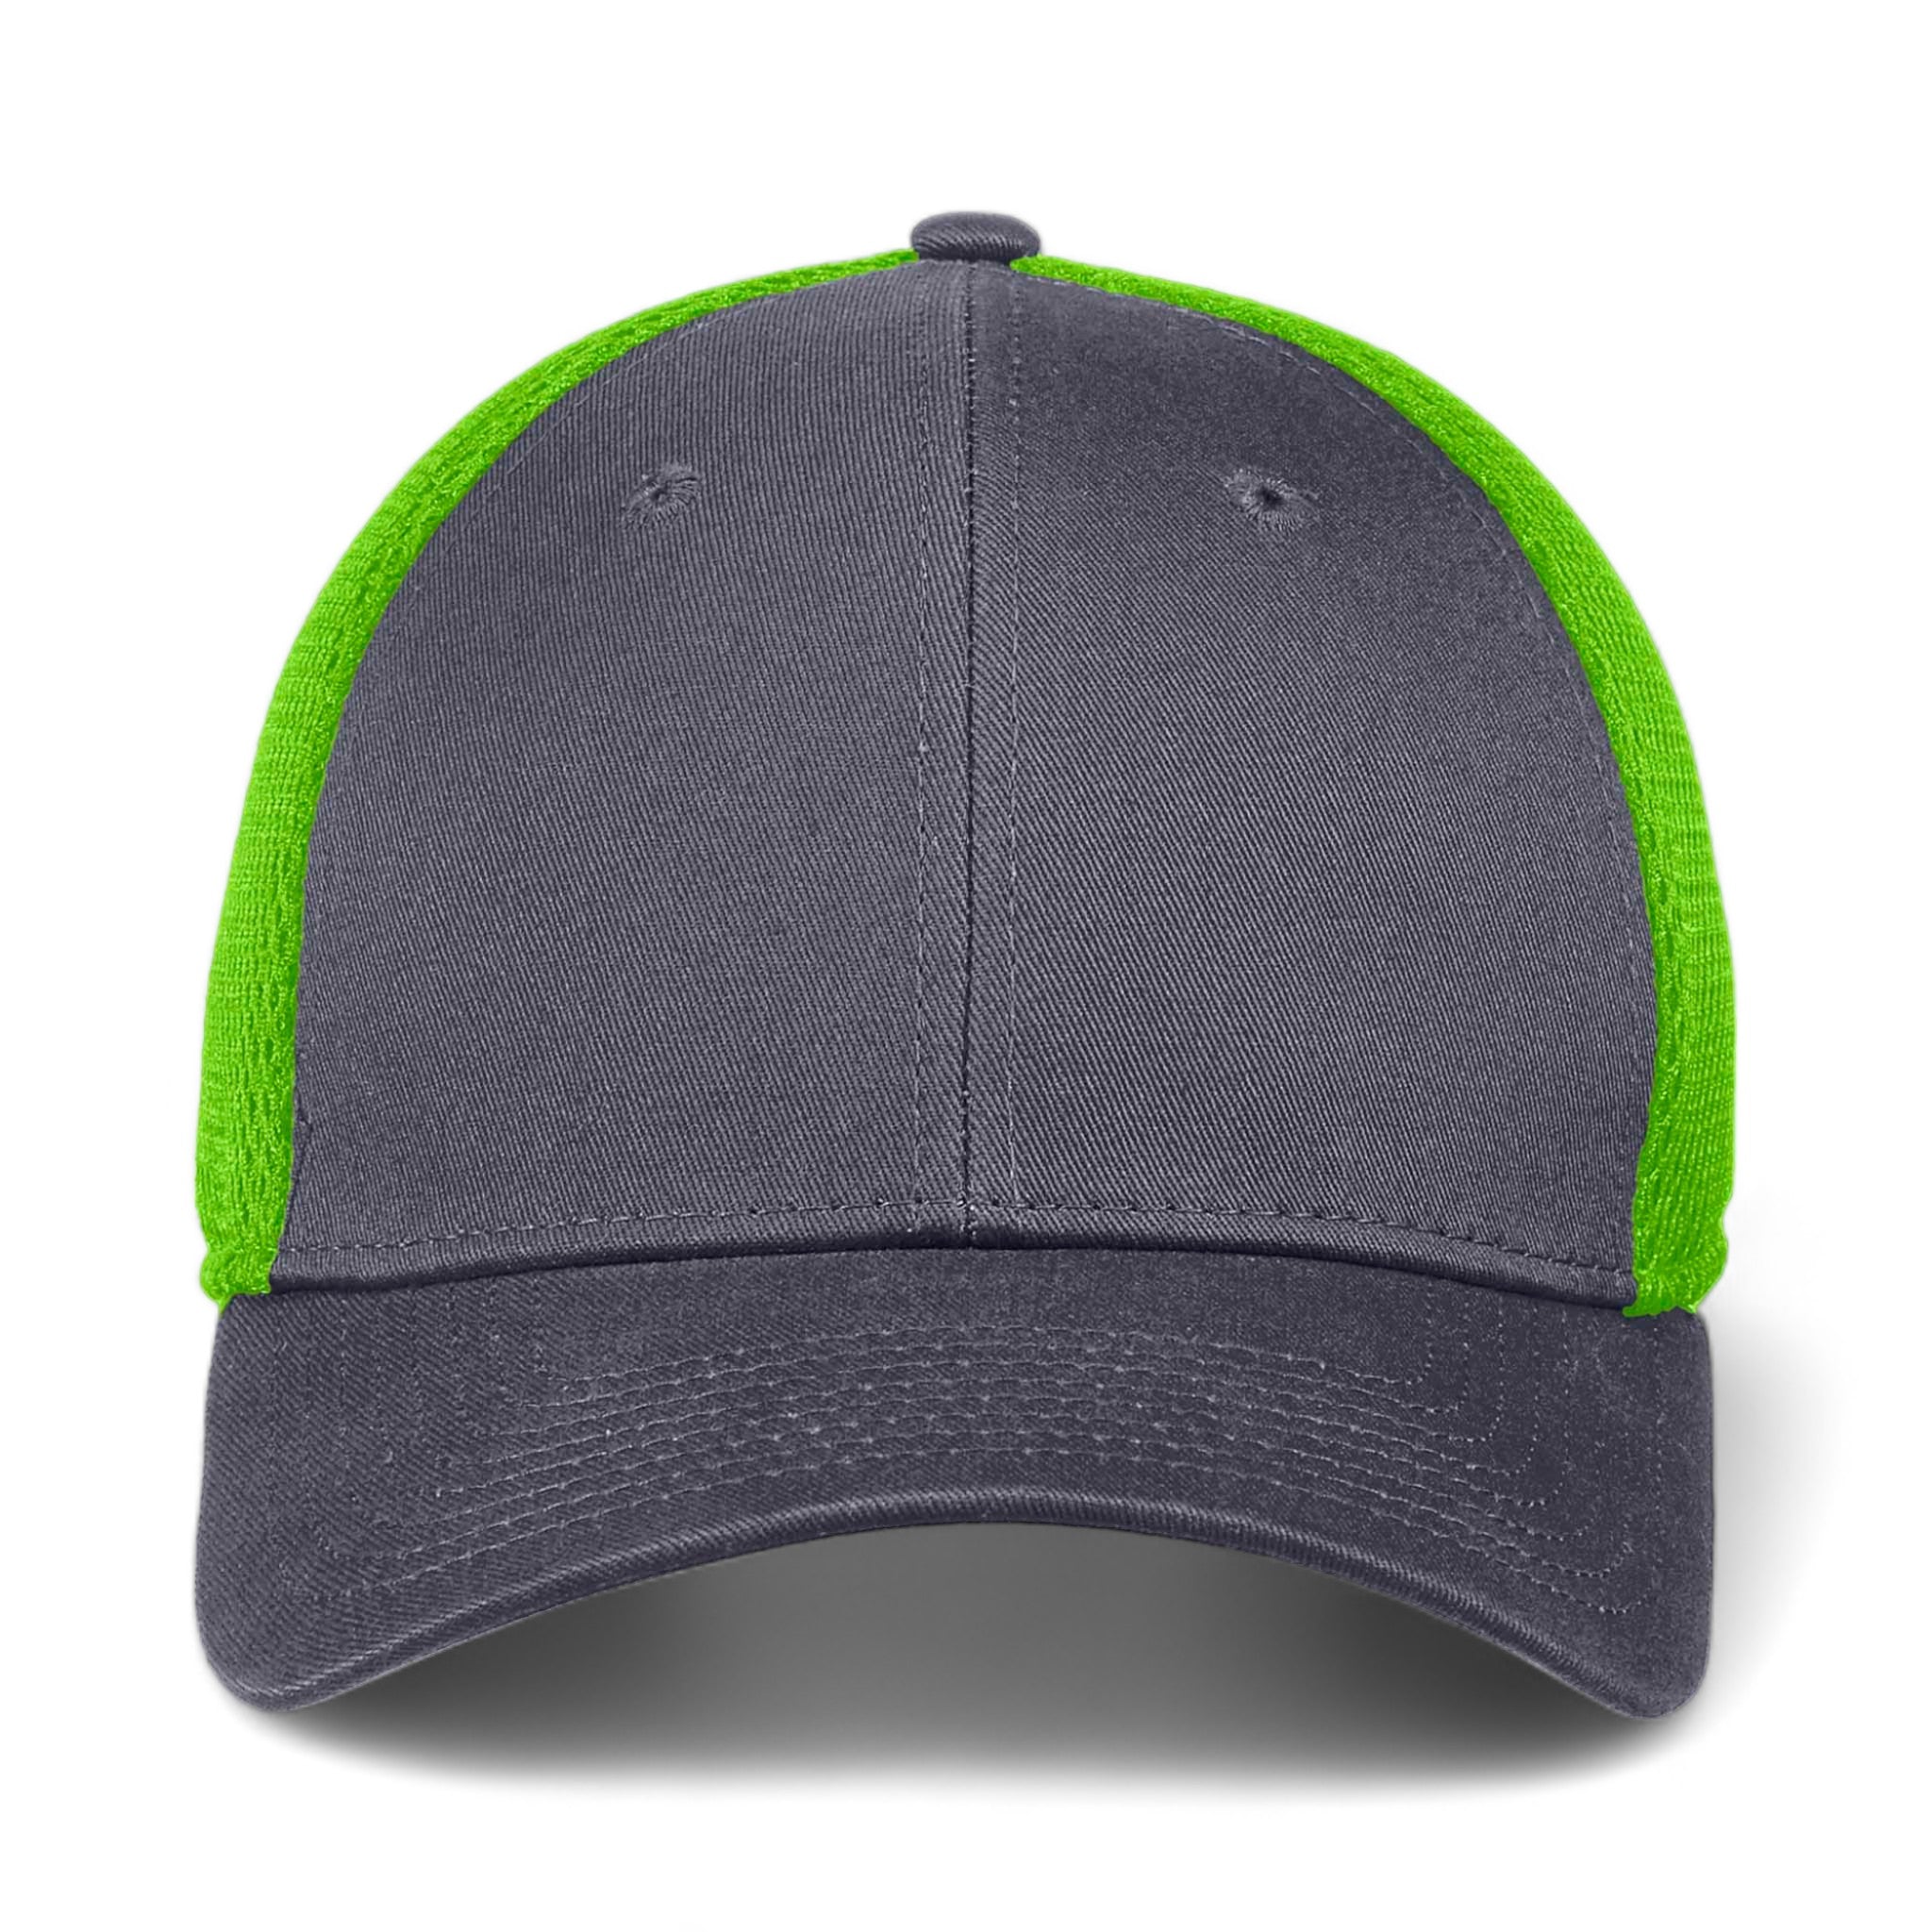 Front view of New Era NE1020 custom hat in graphite and cyber green